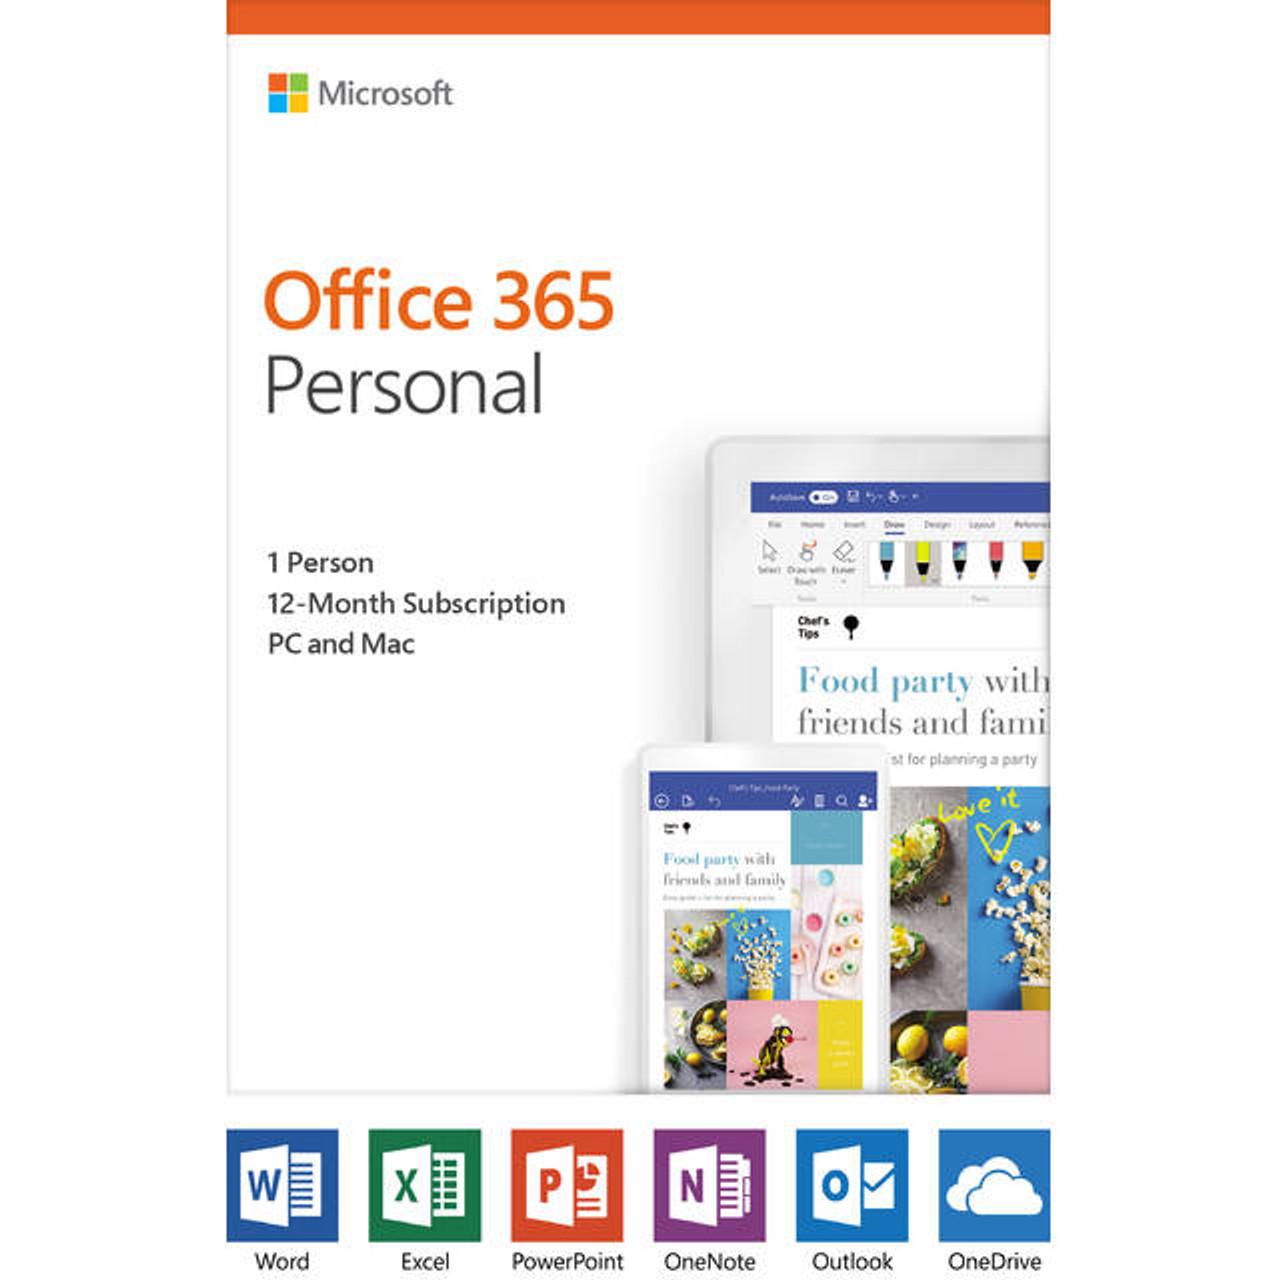 Microsoft Office 365 Personal / 12-month subscription